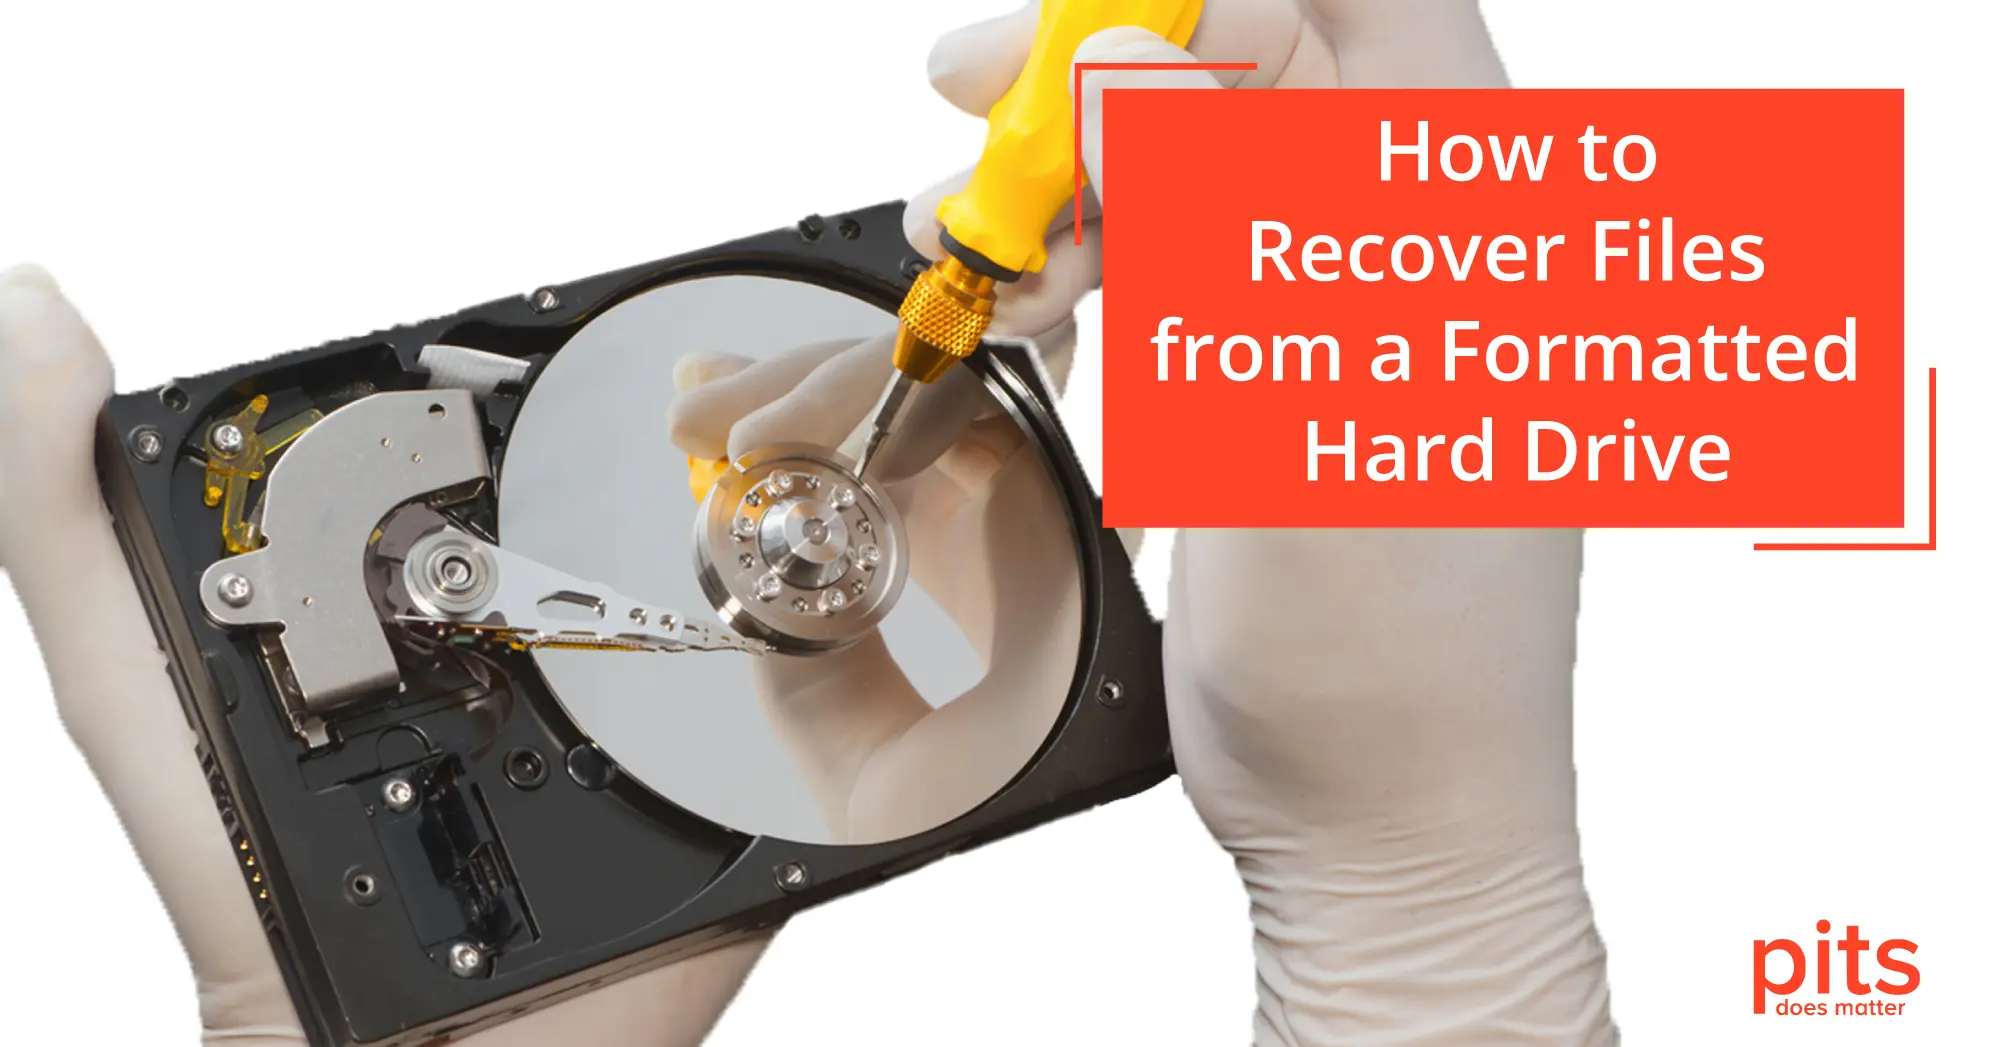 How to Recover Files from a Formatted Hard Drive